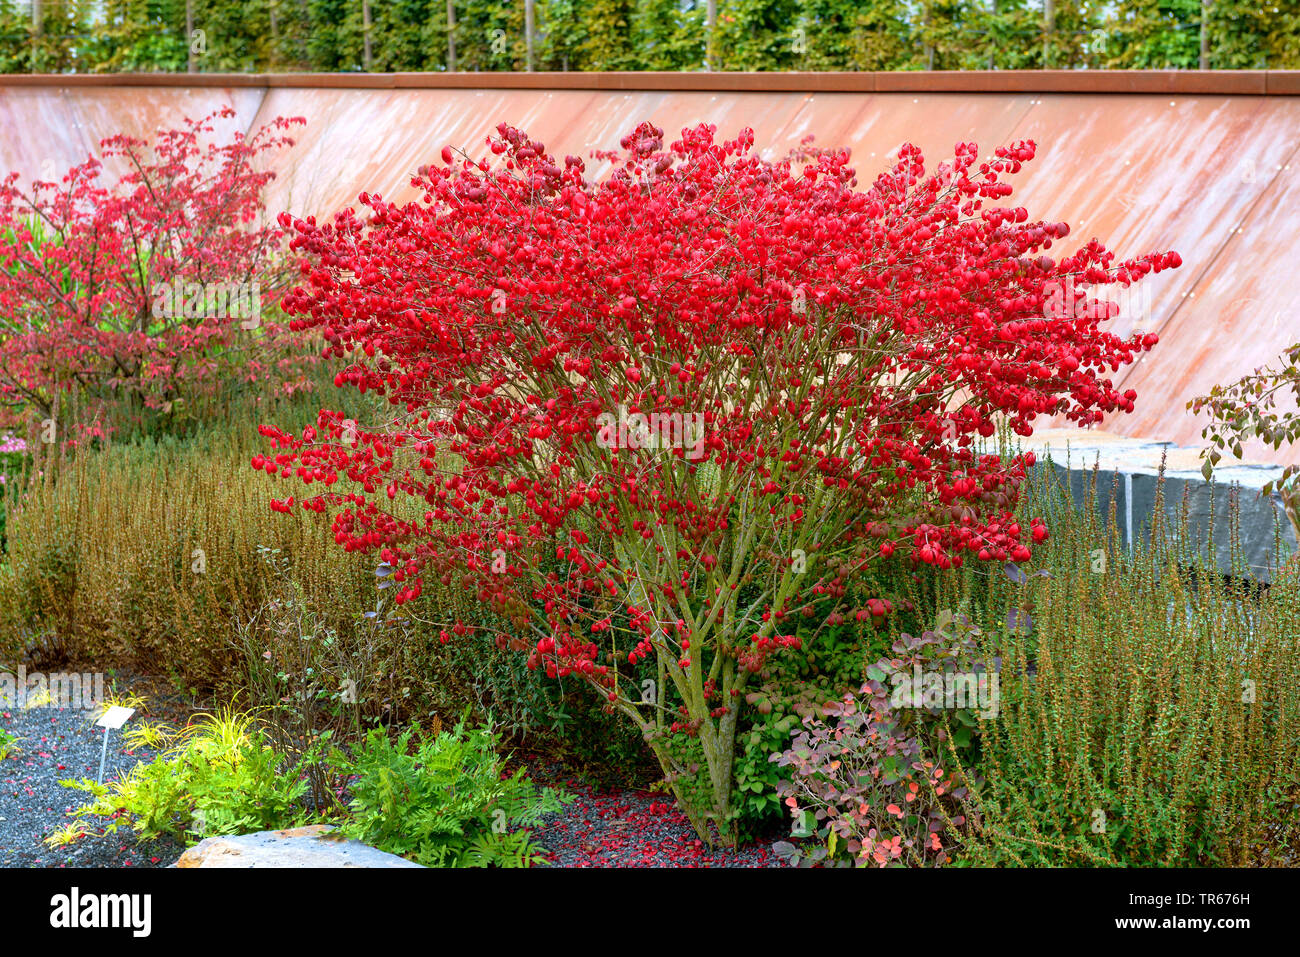 winged burning bush,wahoo, winged euonymus, winged spindle-tree (Euonymus alatus 'Compactus', Euonymus alatus Compactus, Euonymus alata, Euonymus alatus), cultivar Compactus in autumn, Germany, Hesse Stock Photo